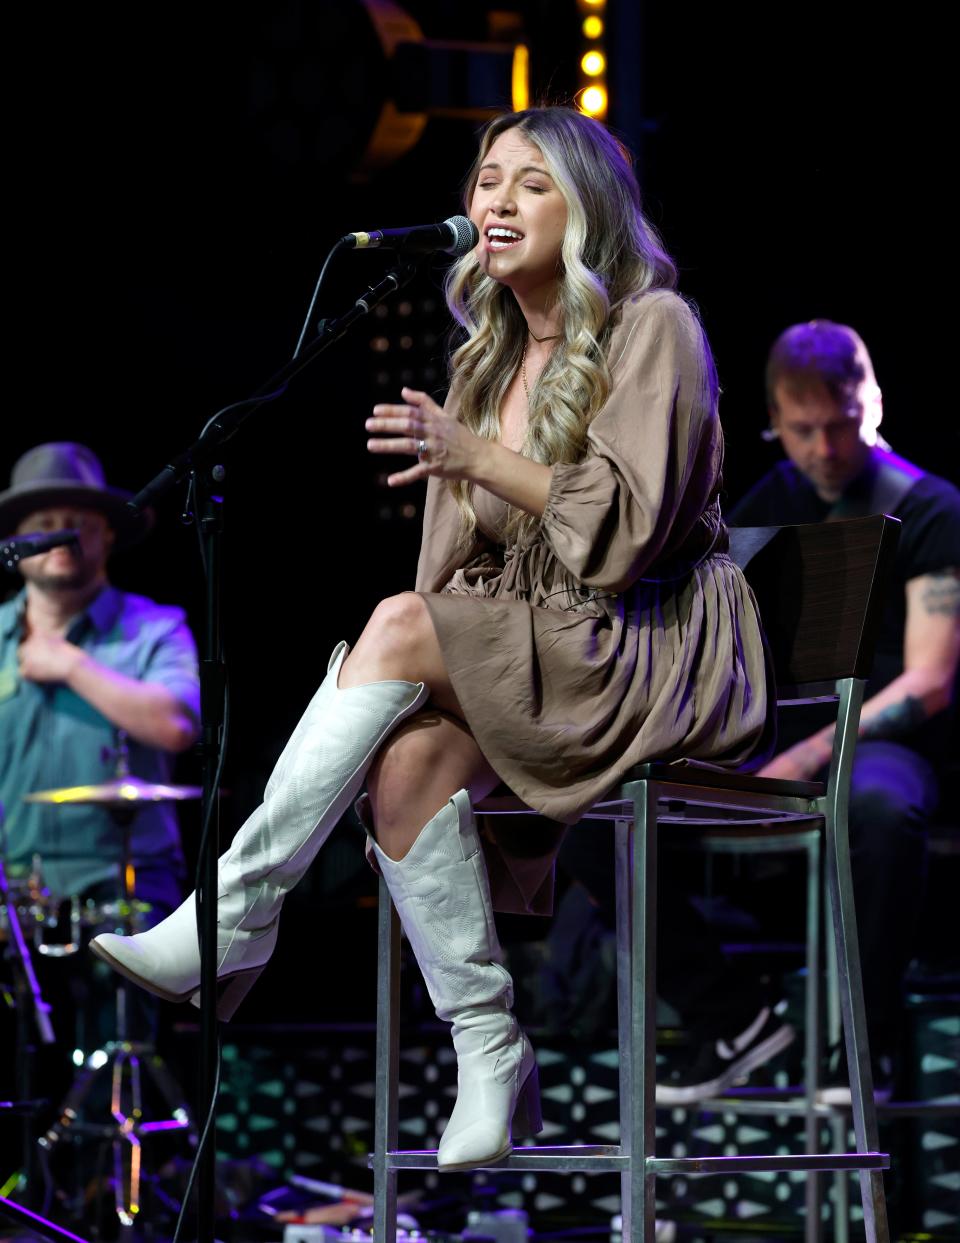 November 22, 2022: Alexandra Kay performs at the 17th Annual Mission: Possible Turkey Fry and Benefit Concert at Wildhorse Saloon in Nashville, Tennessee.